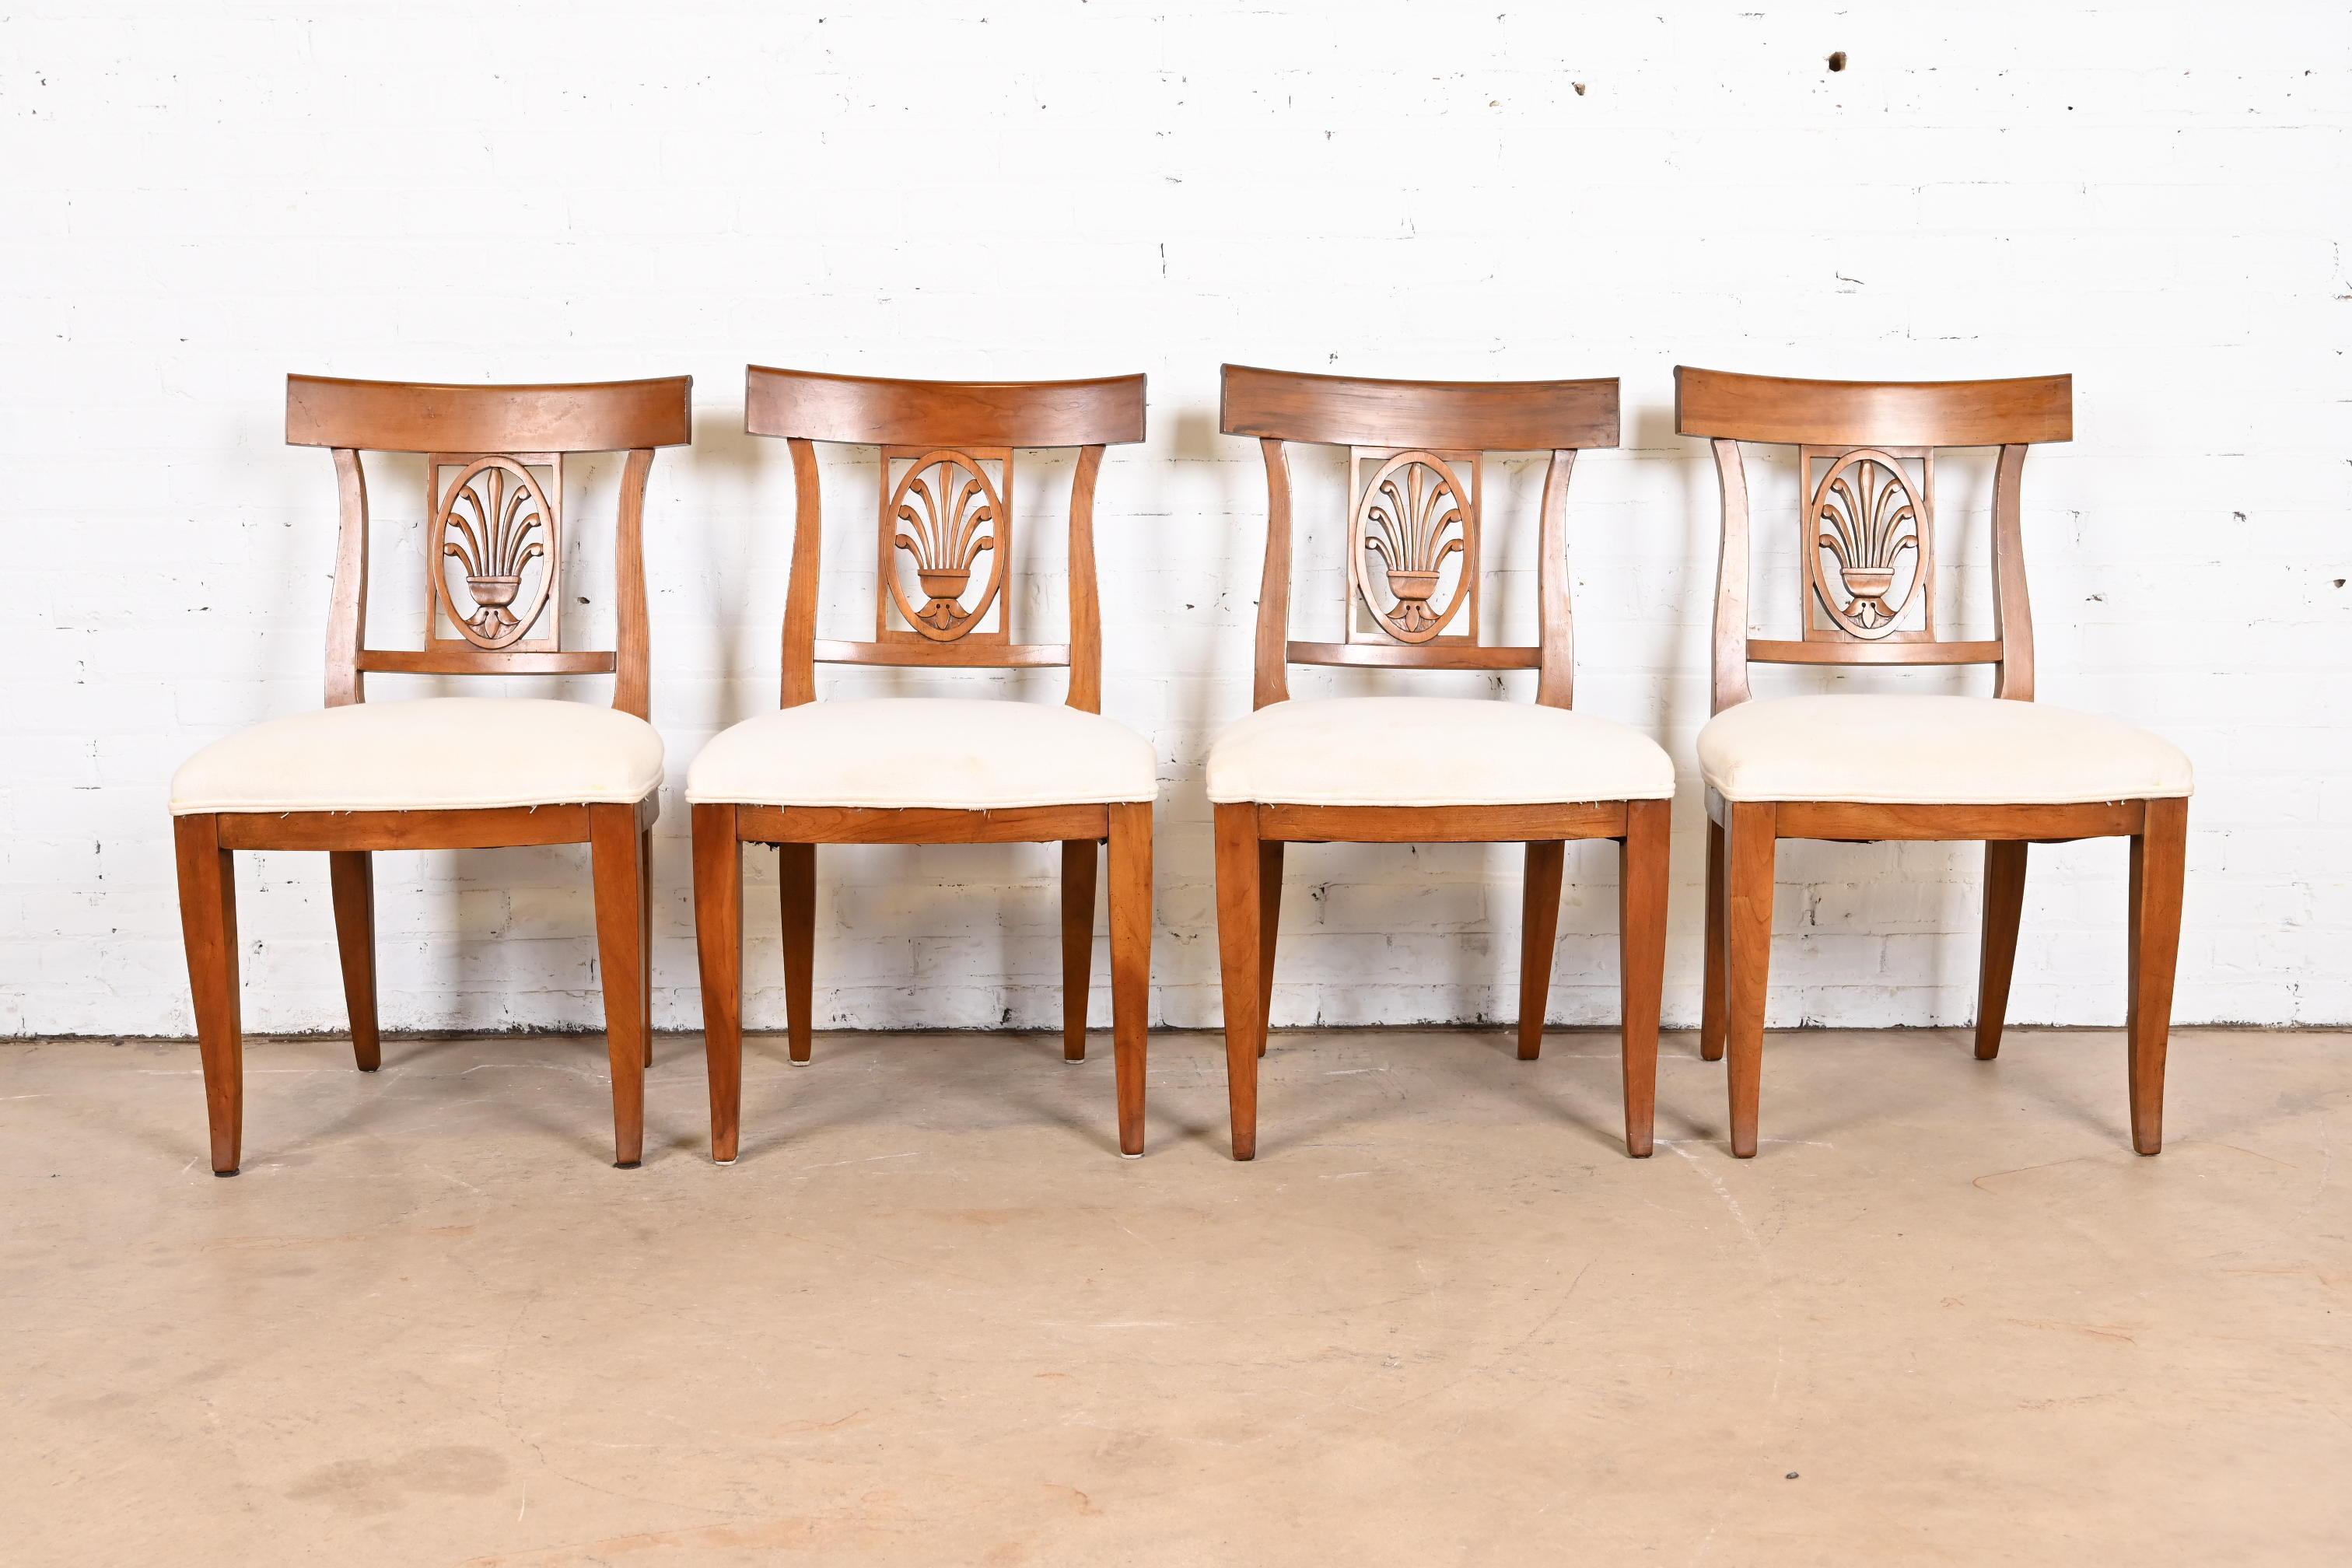 Kindel Furniture Regency Carved Fruitwood Dining Chairs, Set of Four In Good Condition For Sale In South Bend, IN